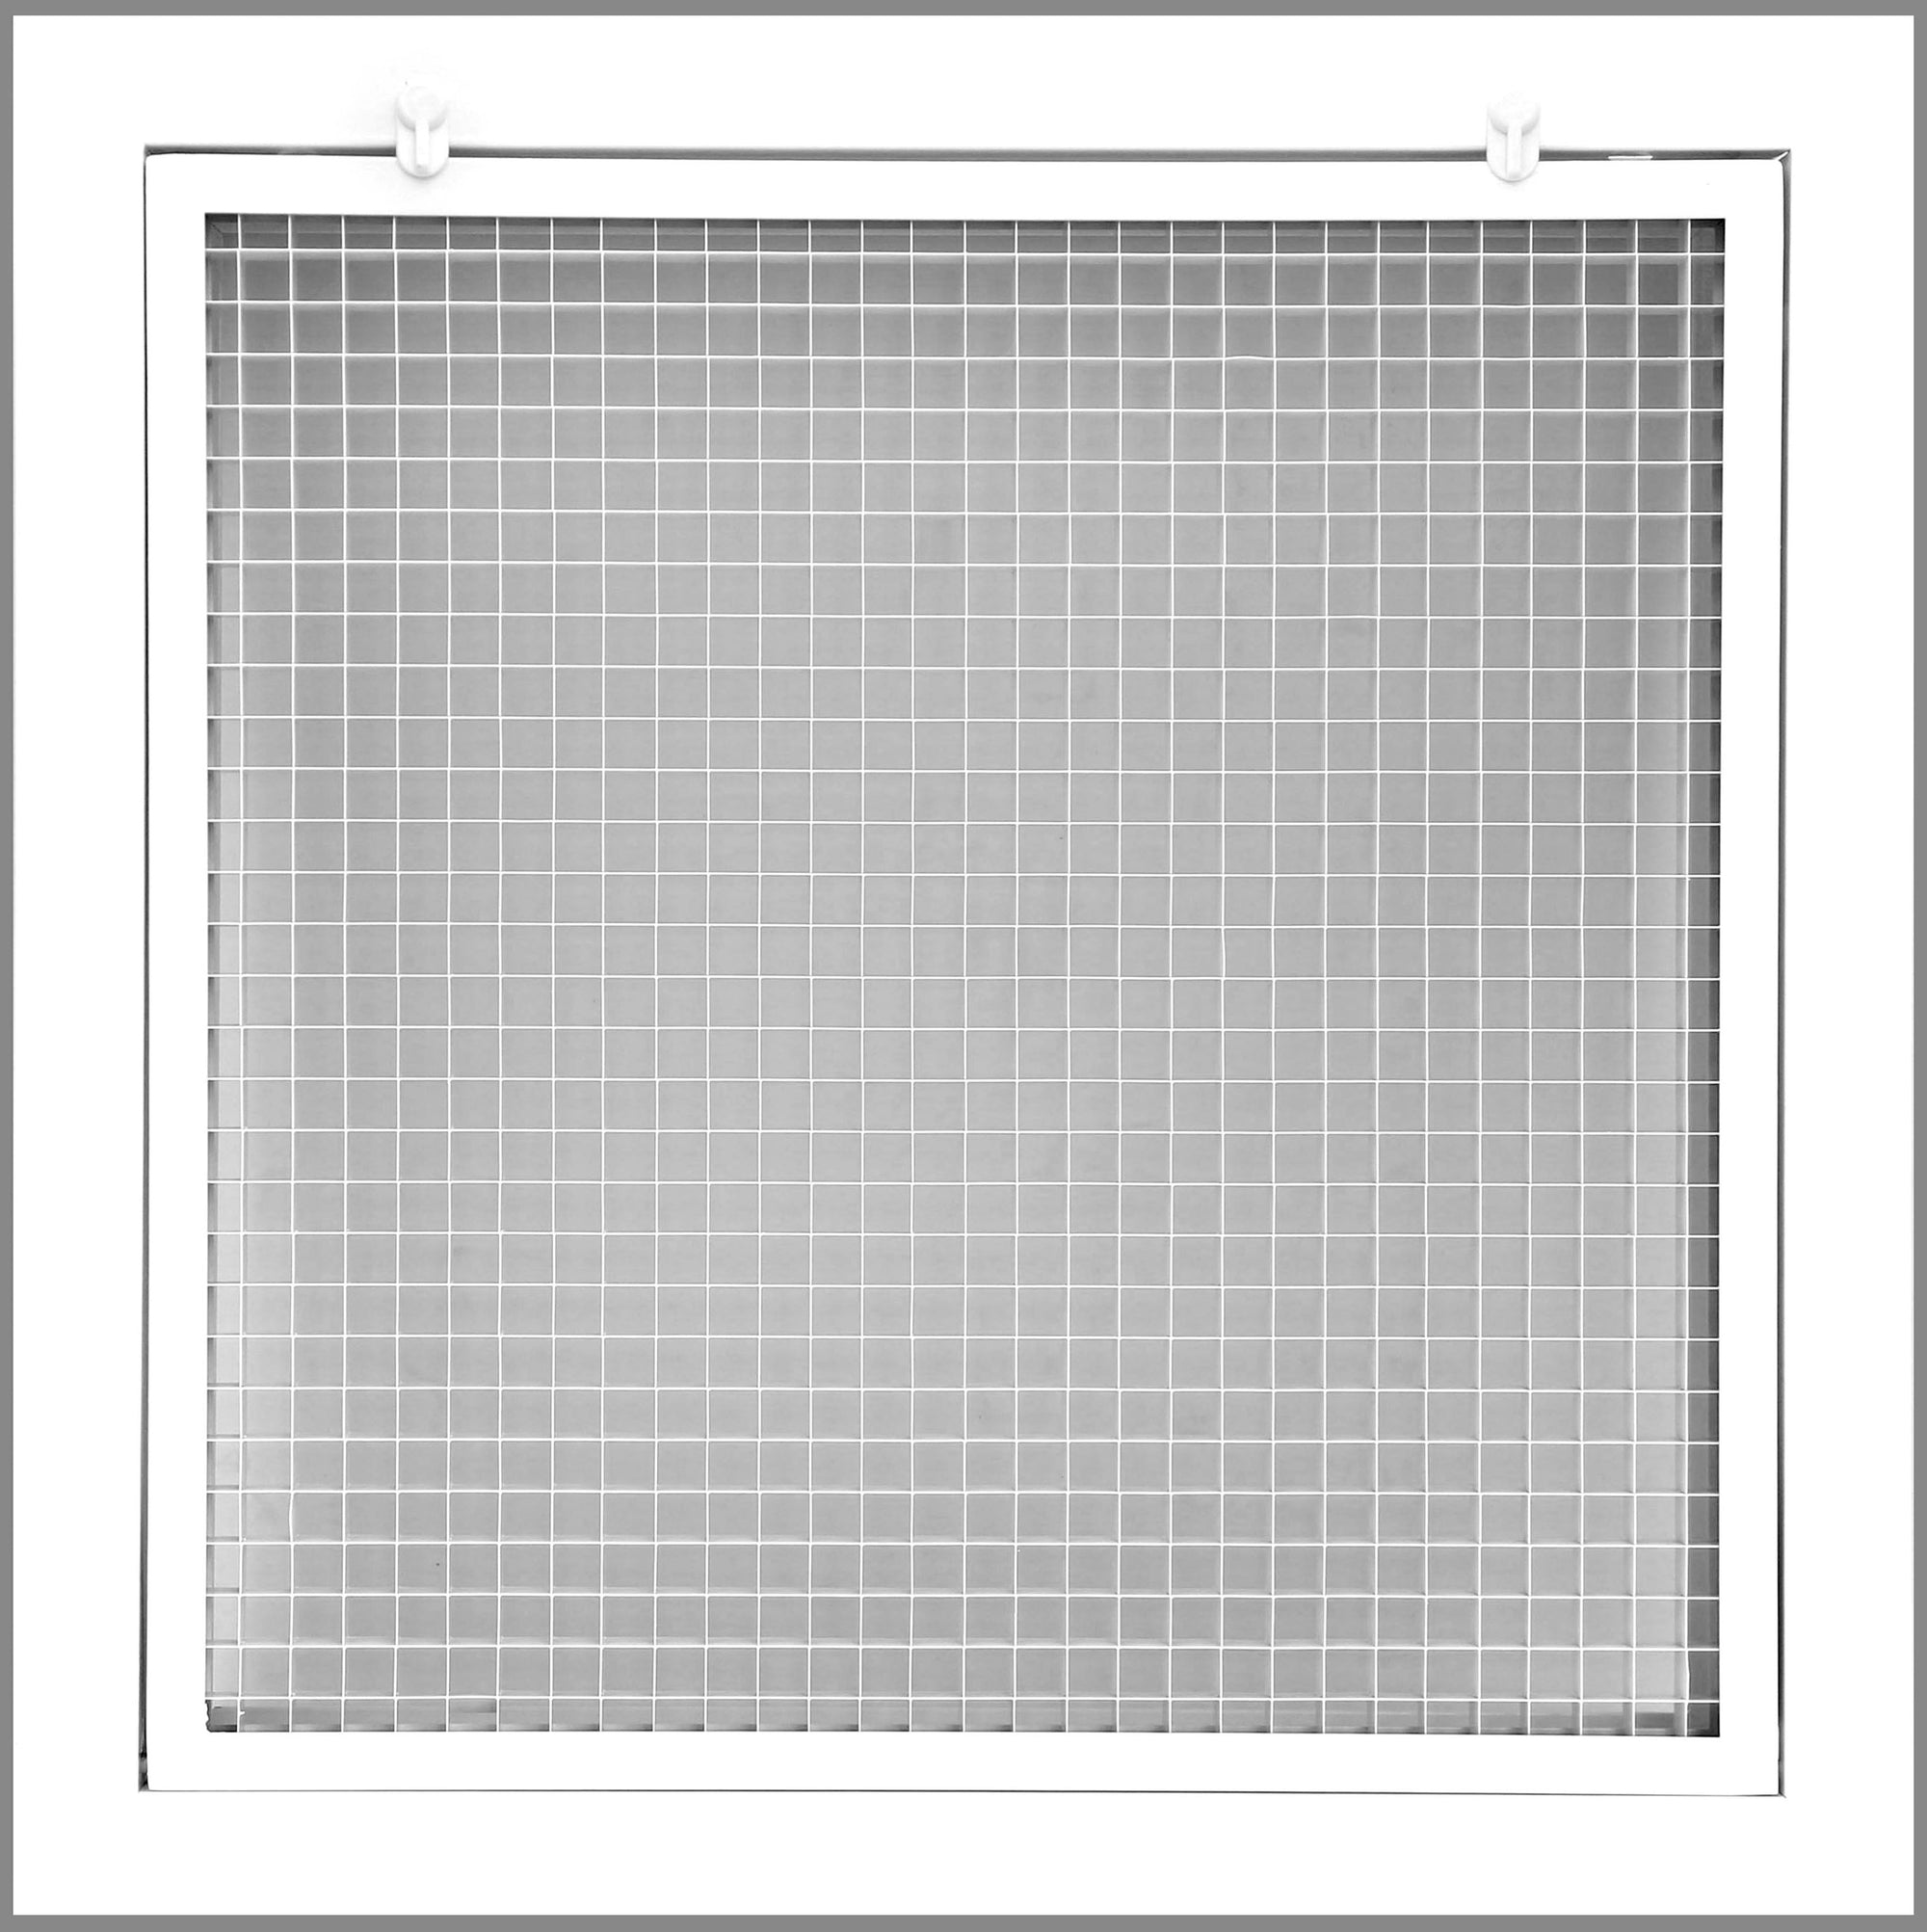 30" x 30" Cube Core Eggcrate Return Air Filter Grille for 1" Filter